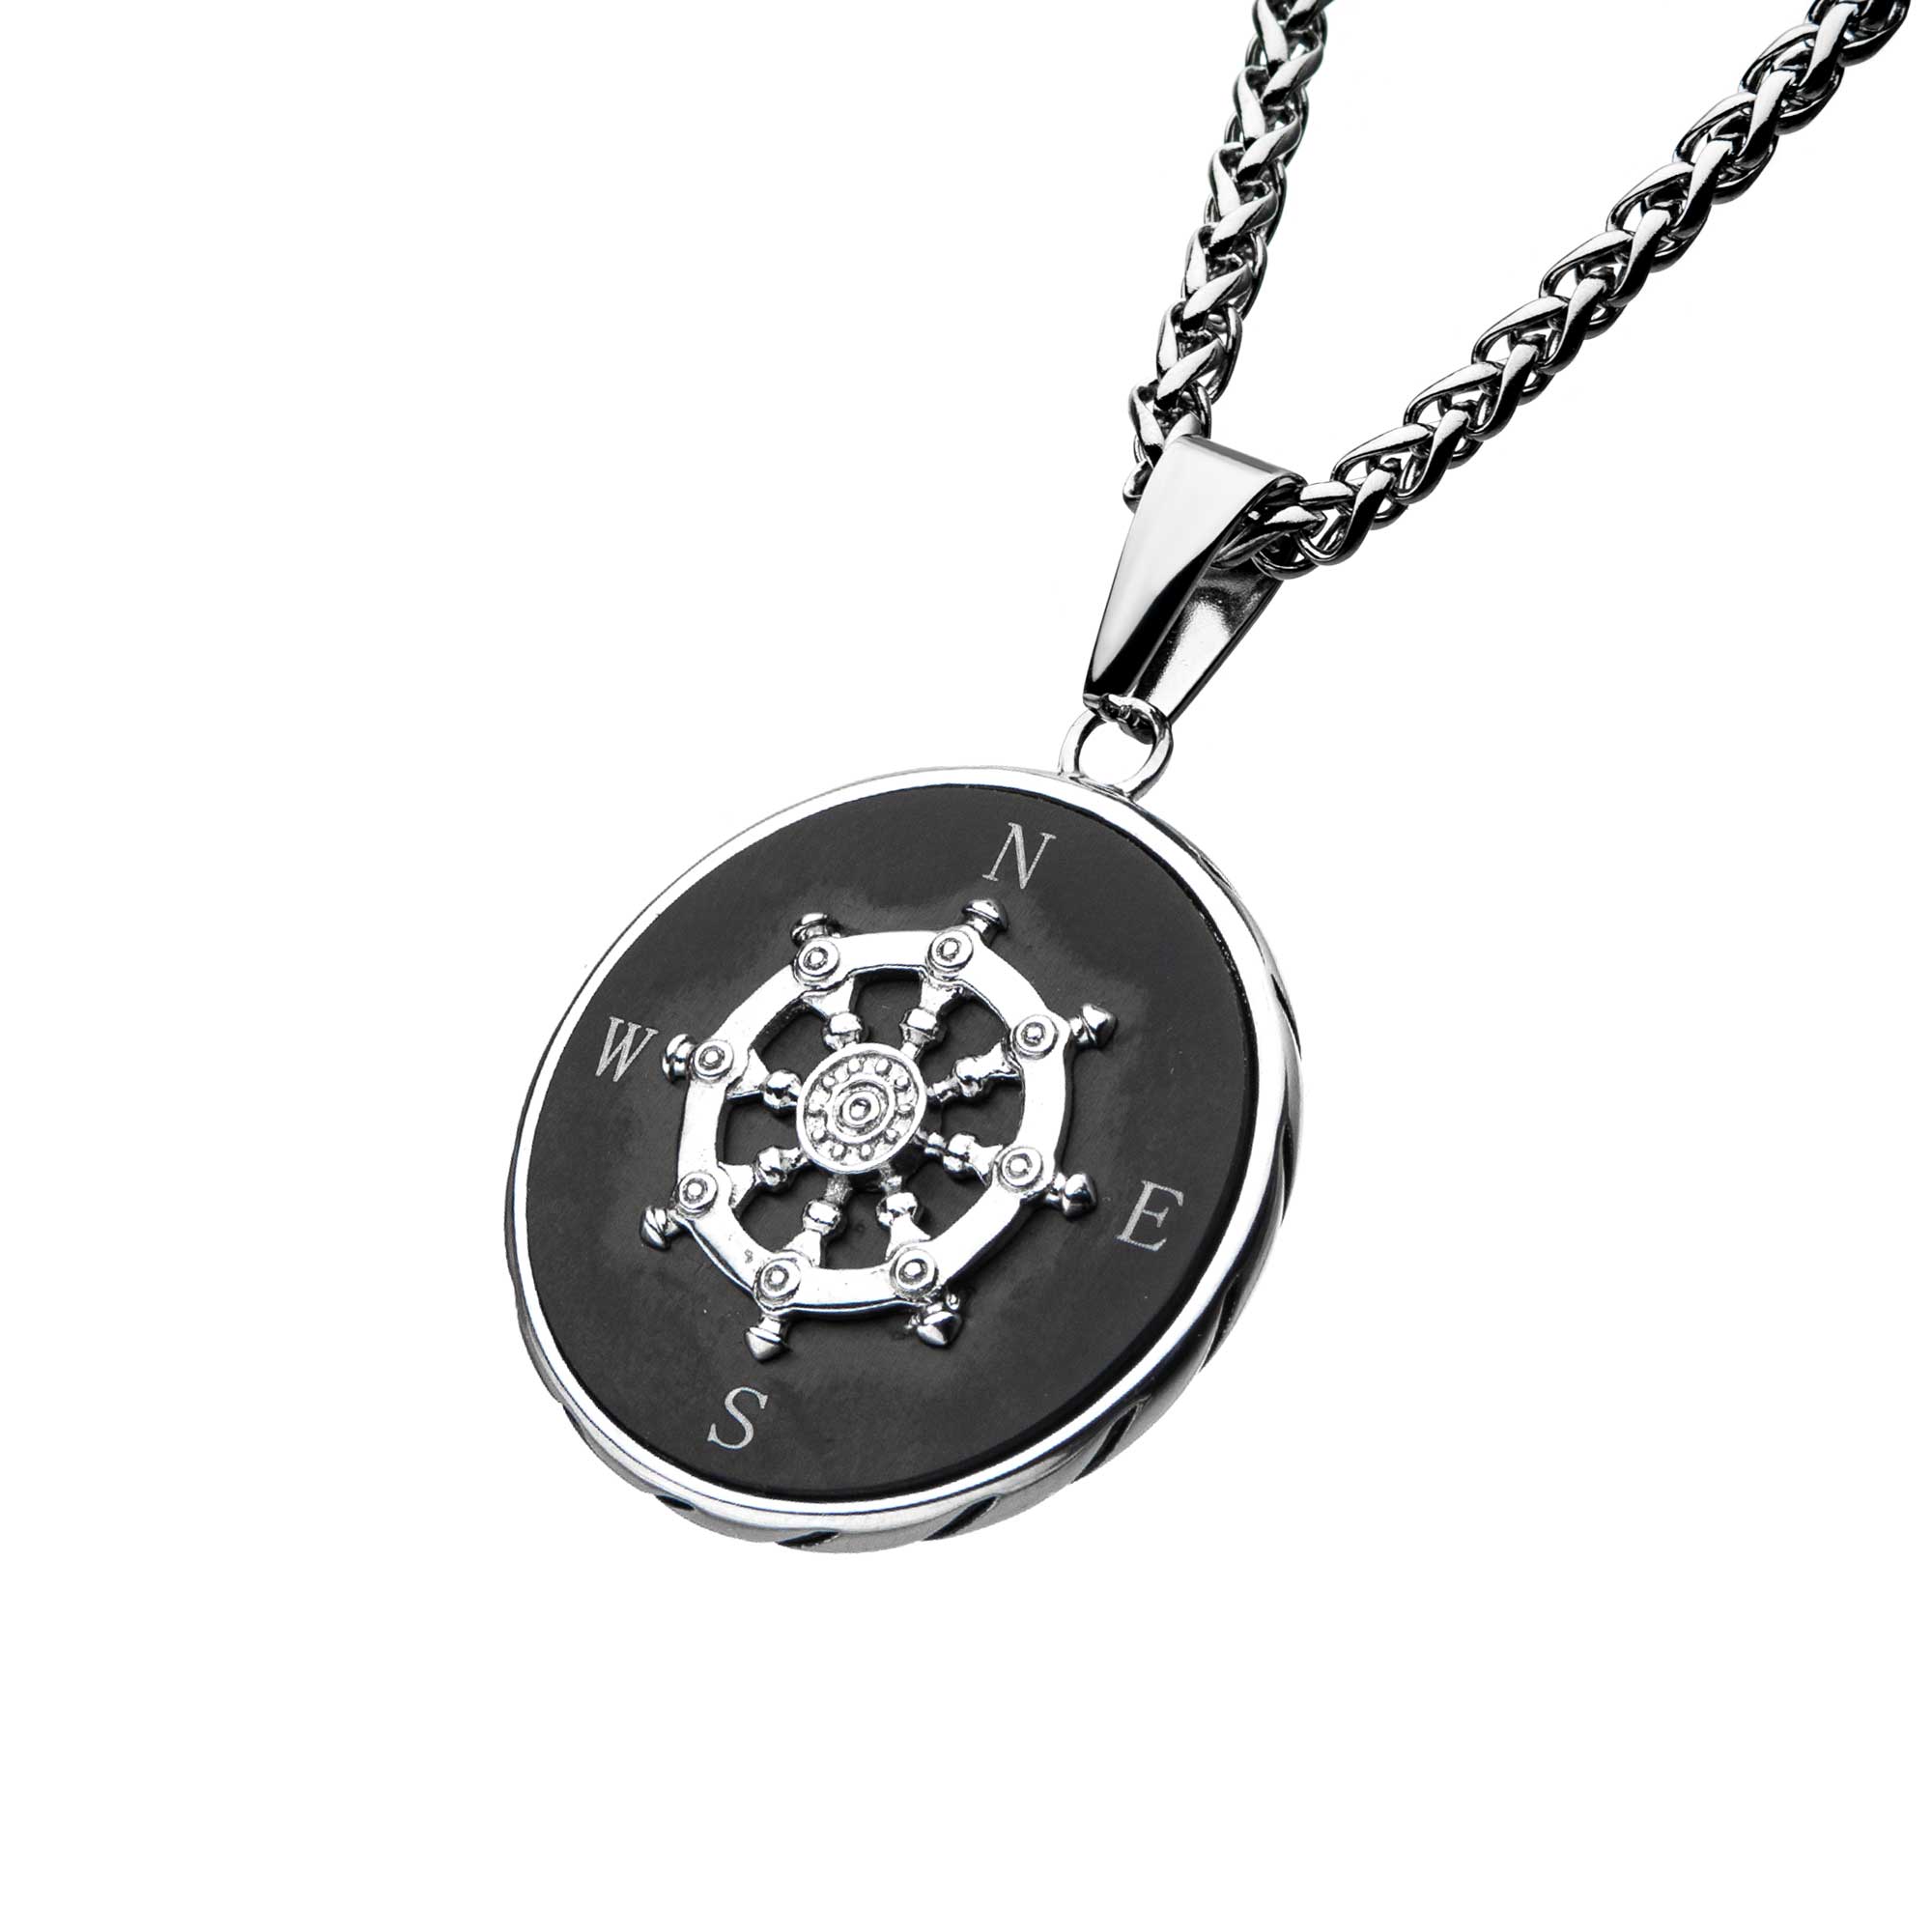 Stainless Steel Black Plated Ship's Wheel Compass Pendant with Chain Image 2 Carroll / Ochs Jewelers Monroe, MI